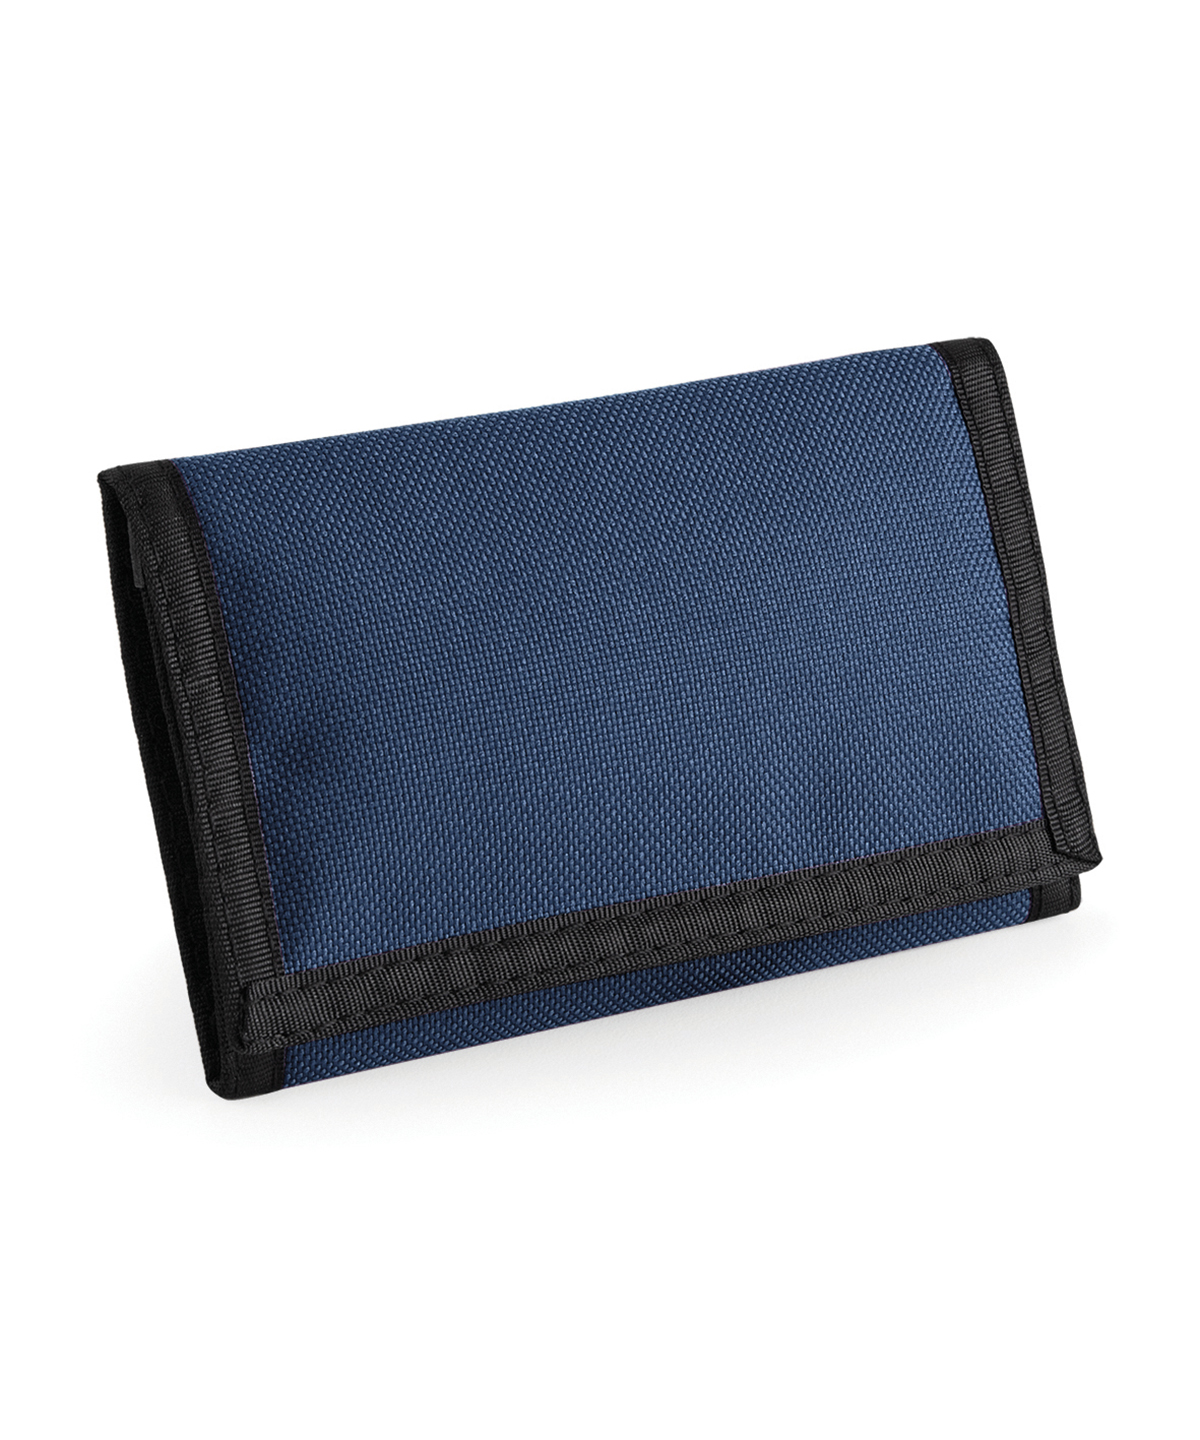 Ripper Wallet French Navy Size One Size